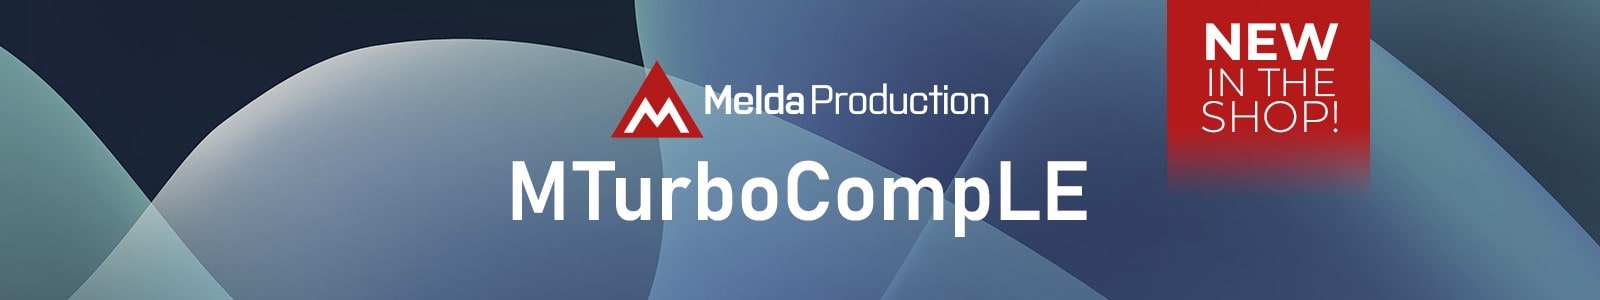 MTurboCompLE by MeldaProduction